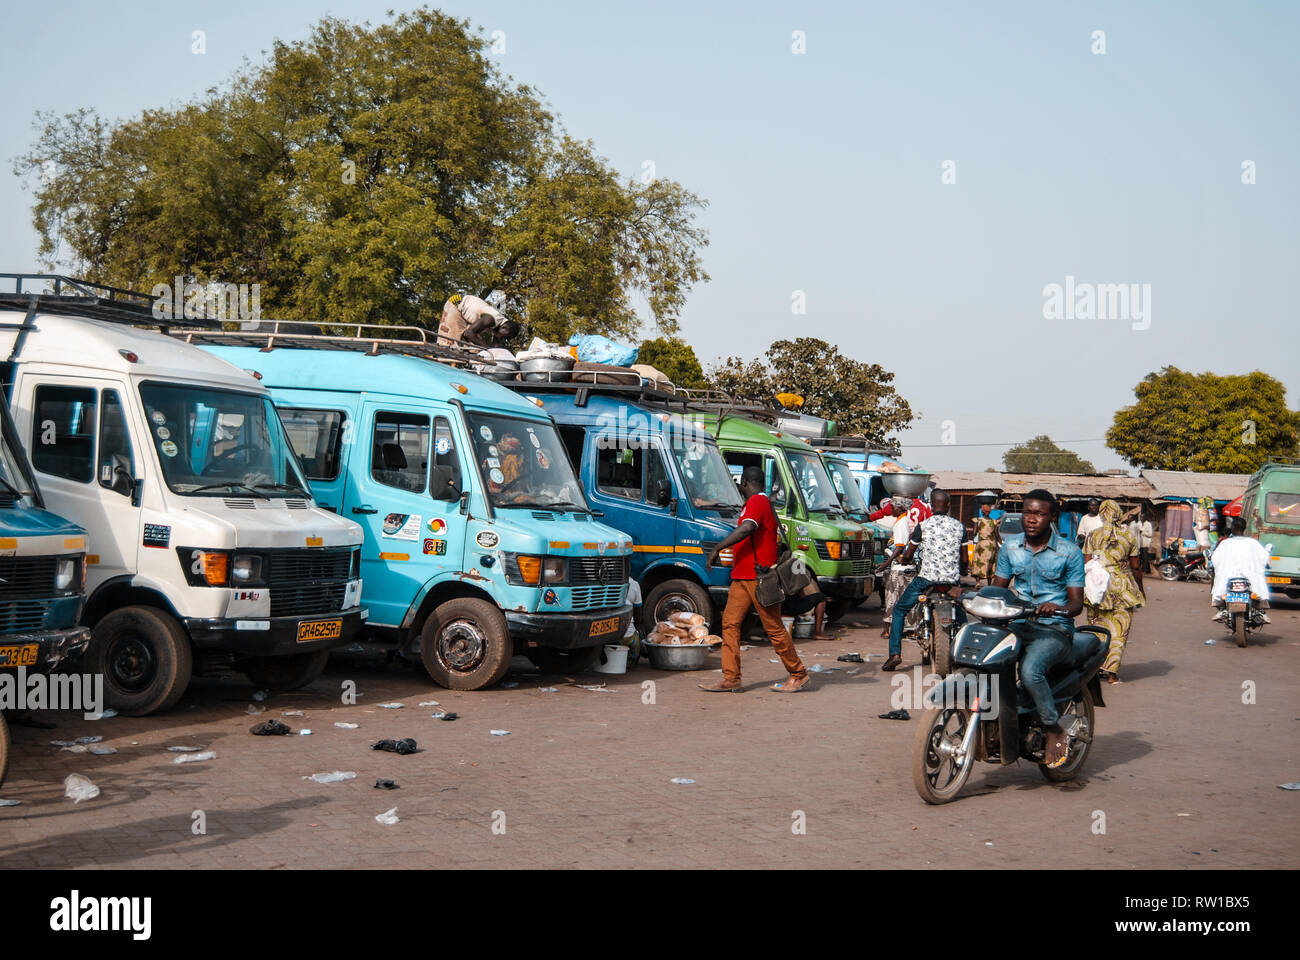 A photo of buses parking at a busy bus station in Bolgatanga, Ghana Stock Photo